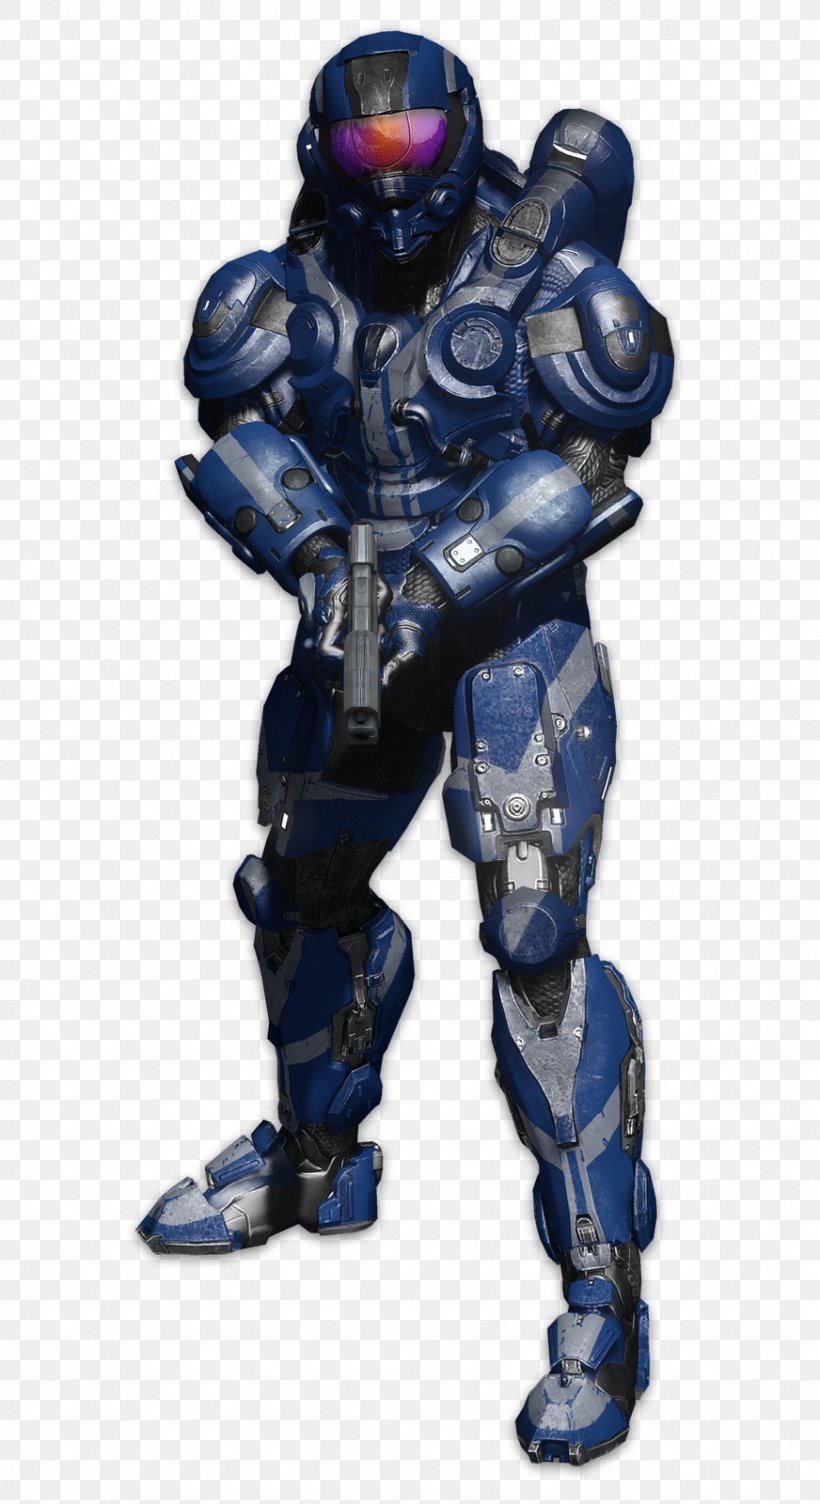 Halo 4 Halo: Reach Halo 3: ODST Halo: Spartan Assault, PNG, 872x1600px, 343 Industries, Halo 4, Action Figure, Armour, Cortana Download Free